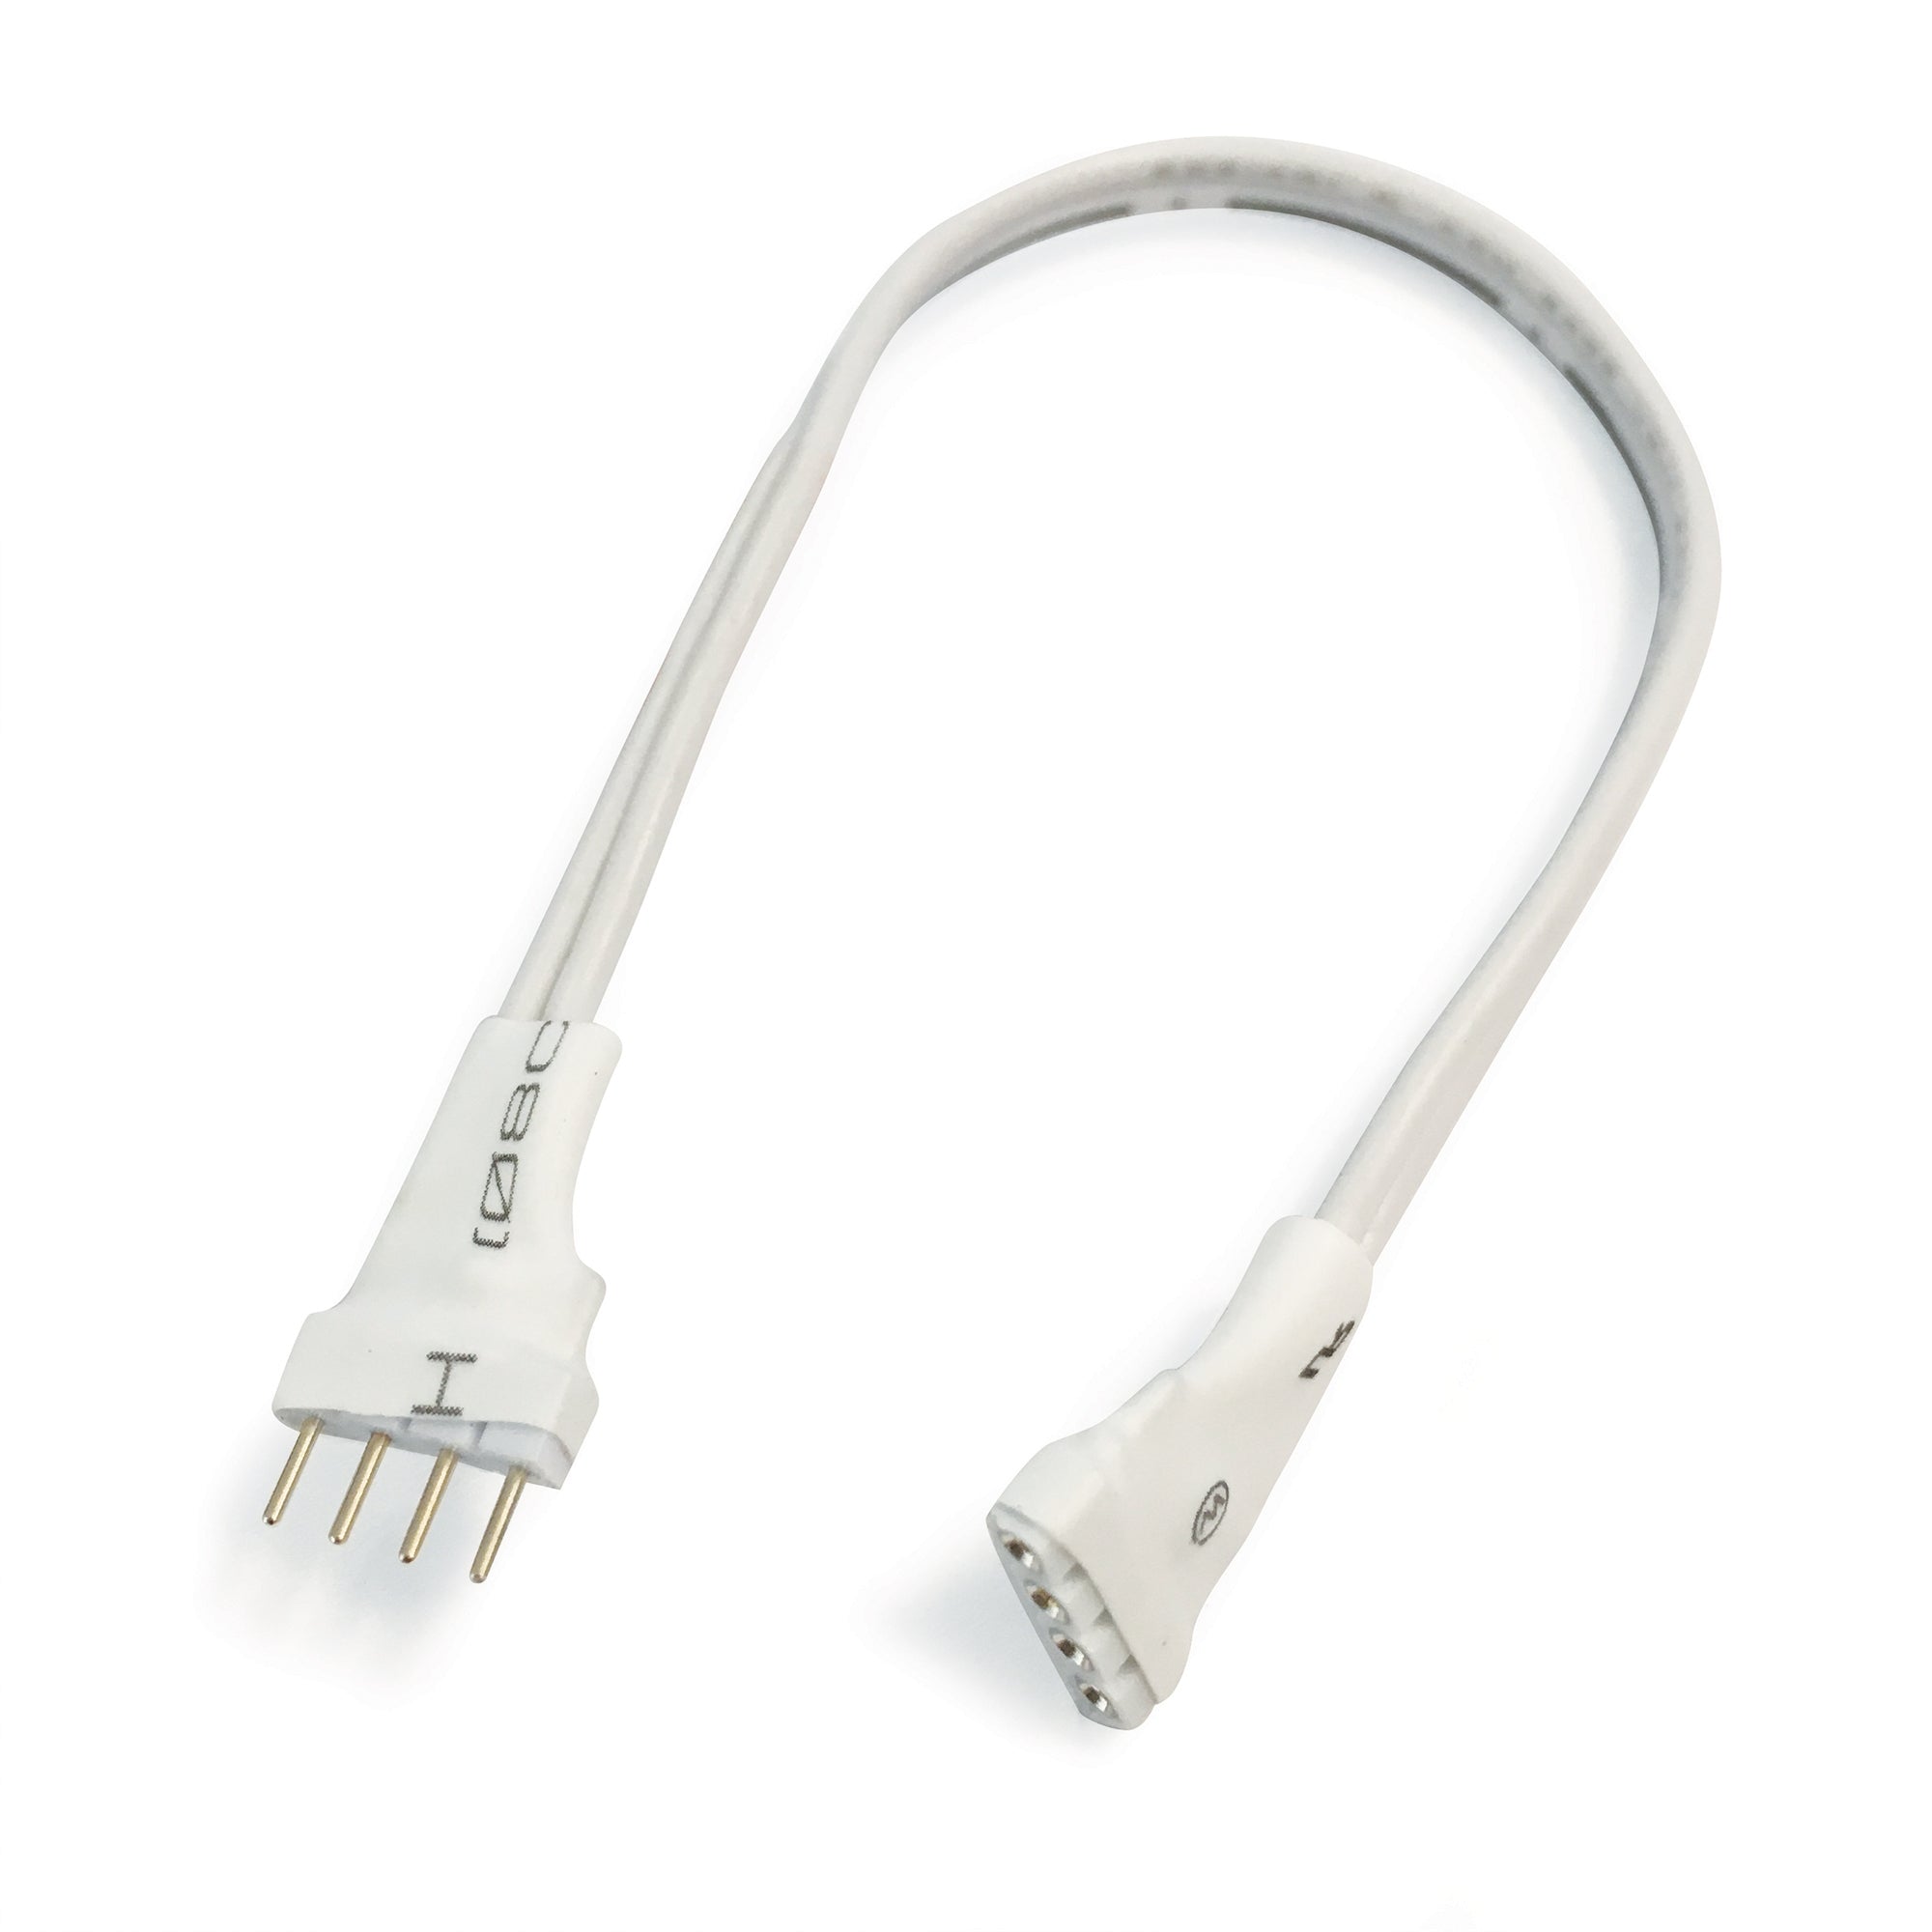 Nora Lighting NARGBW-972W - Accent / Undercabinet - 72 Inch Interconnection Cable for RGBW Tape Light